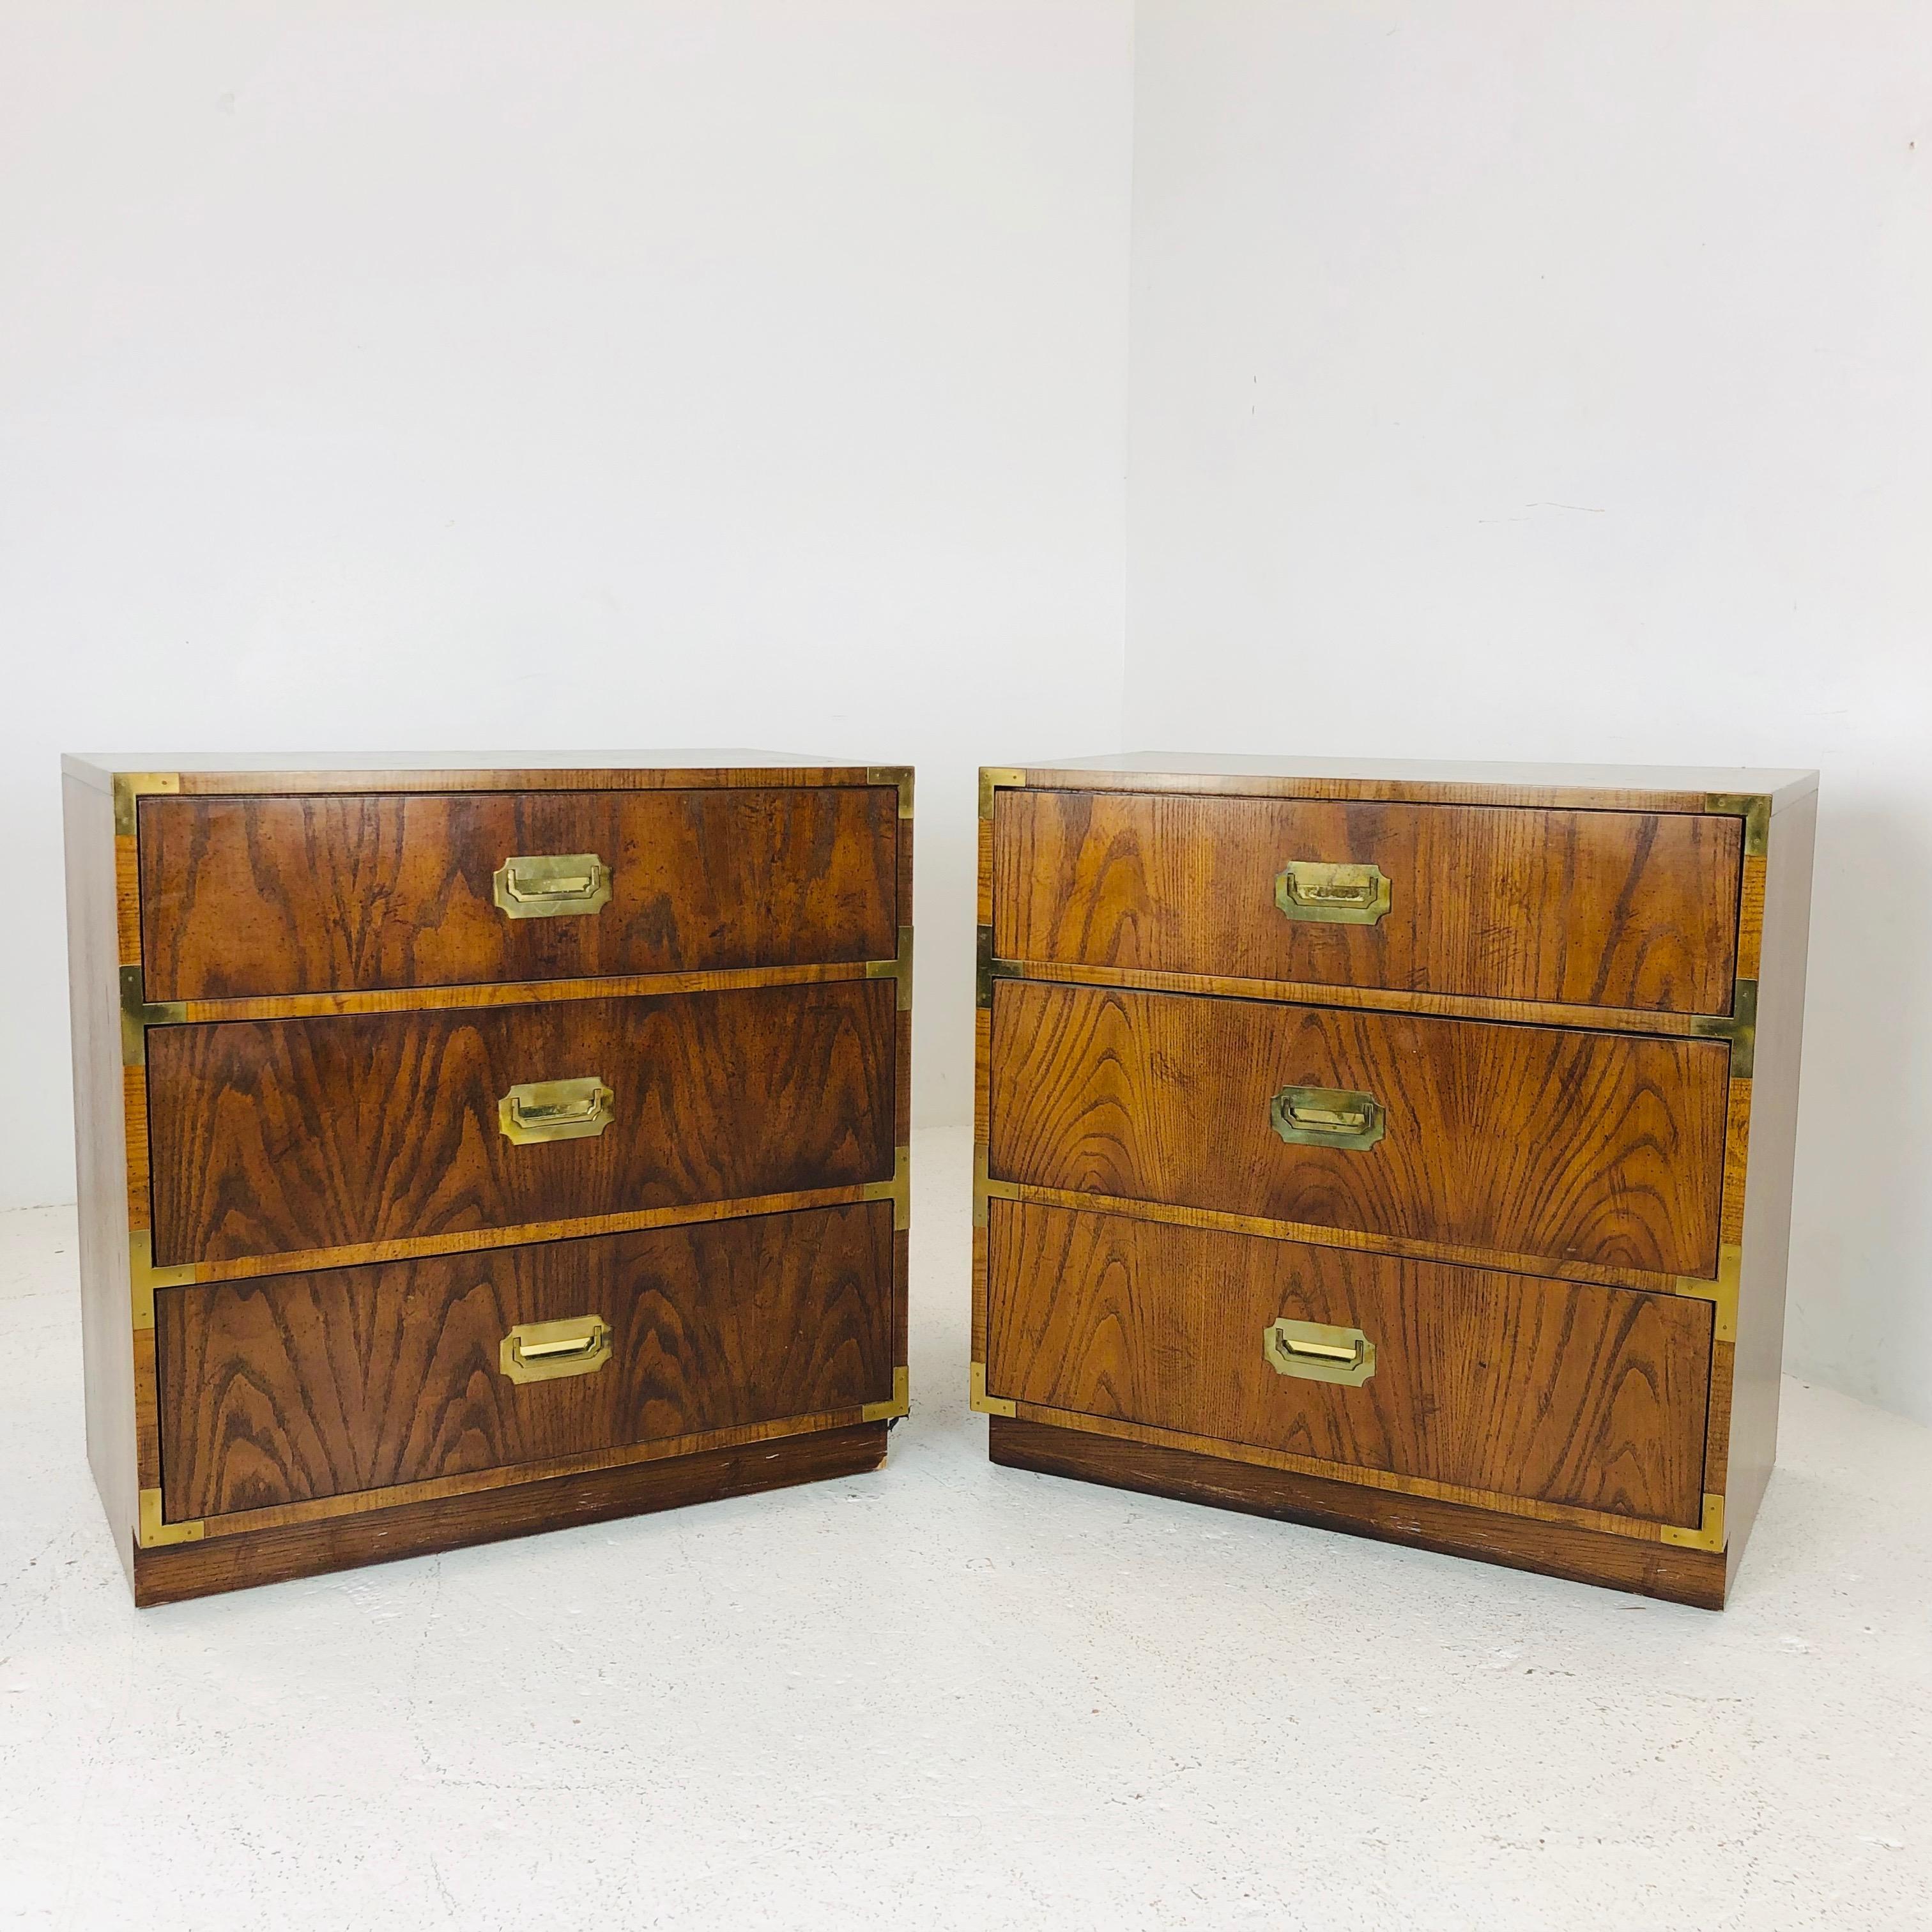 Pair of vintage campaigner chests by Dixie. These chest are in good vintage condition and will need refinishing.


Dimensions:
30 W x 18.5 D x 30 T.